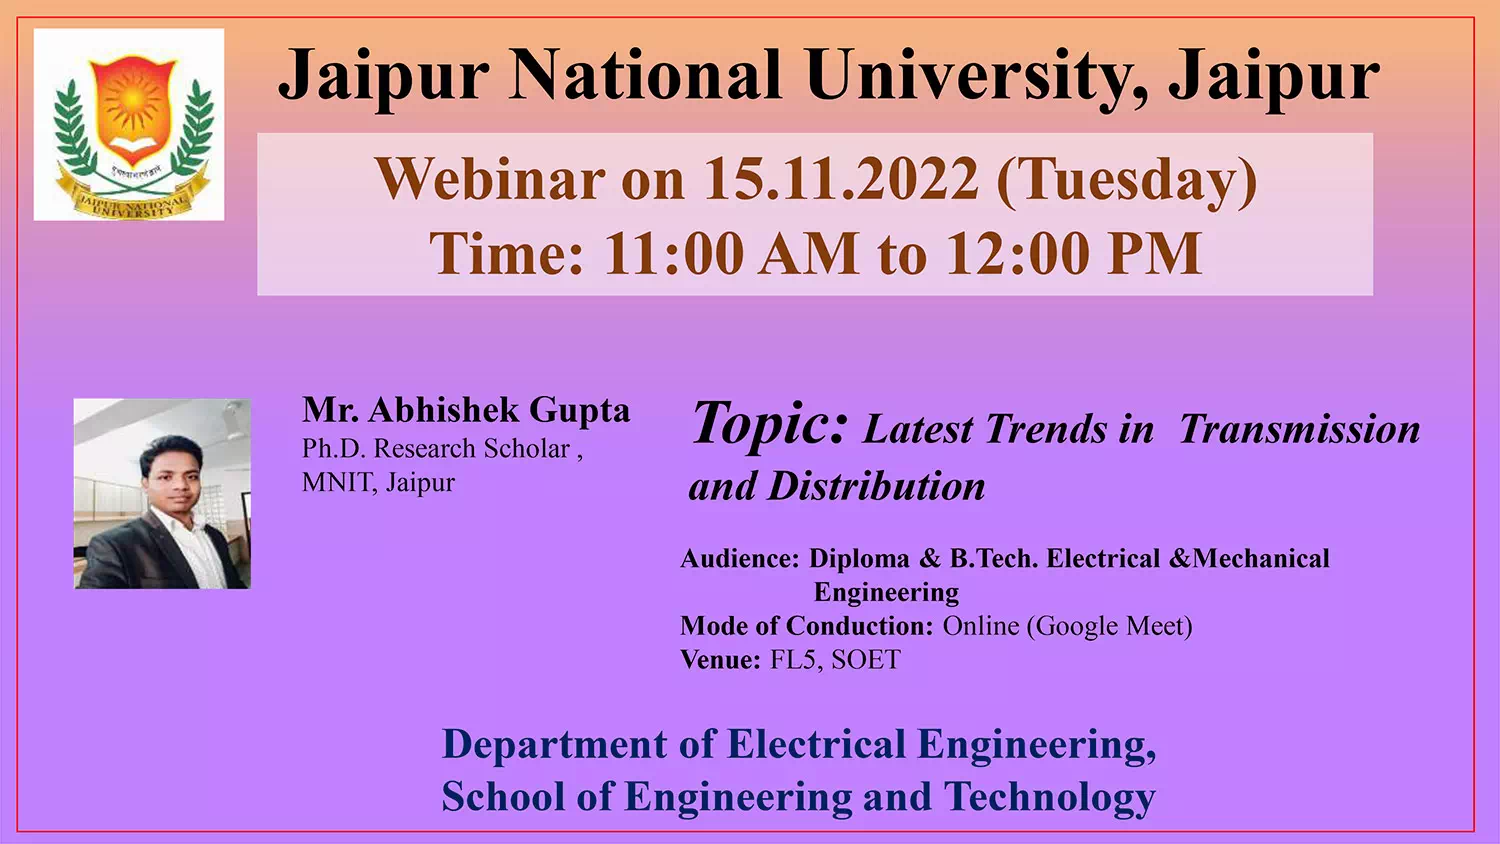 Webinar on Latest Trends in Transmission and Distribution